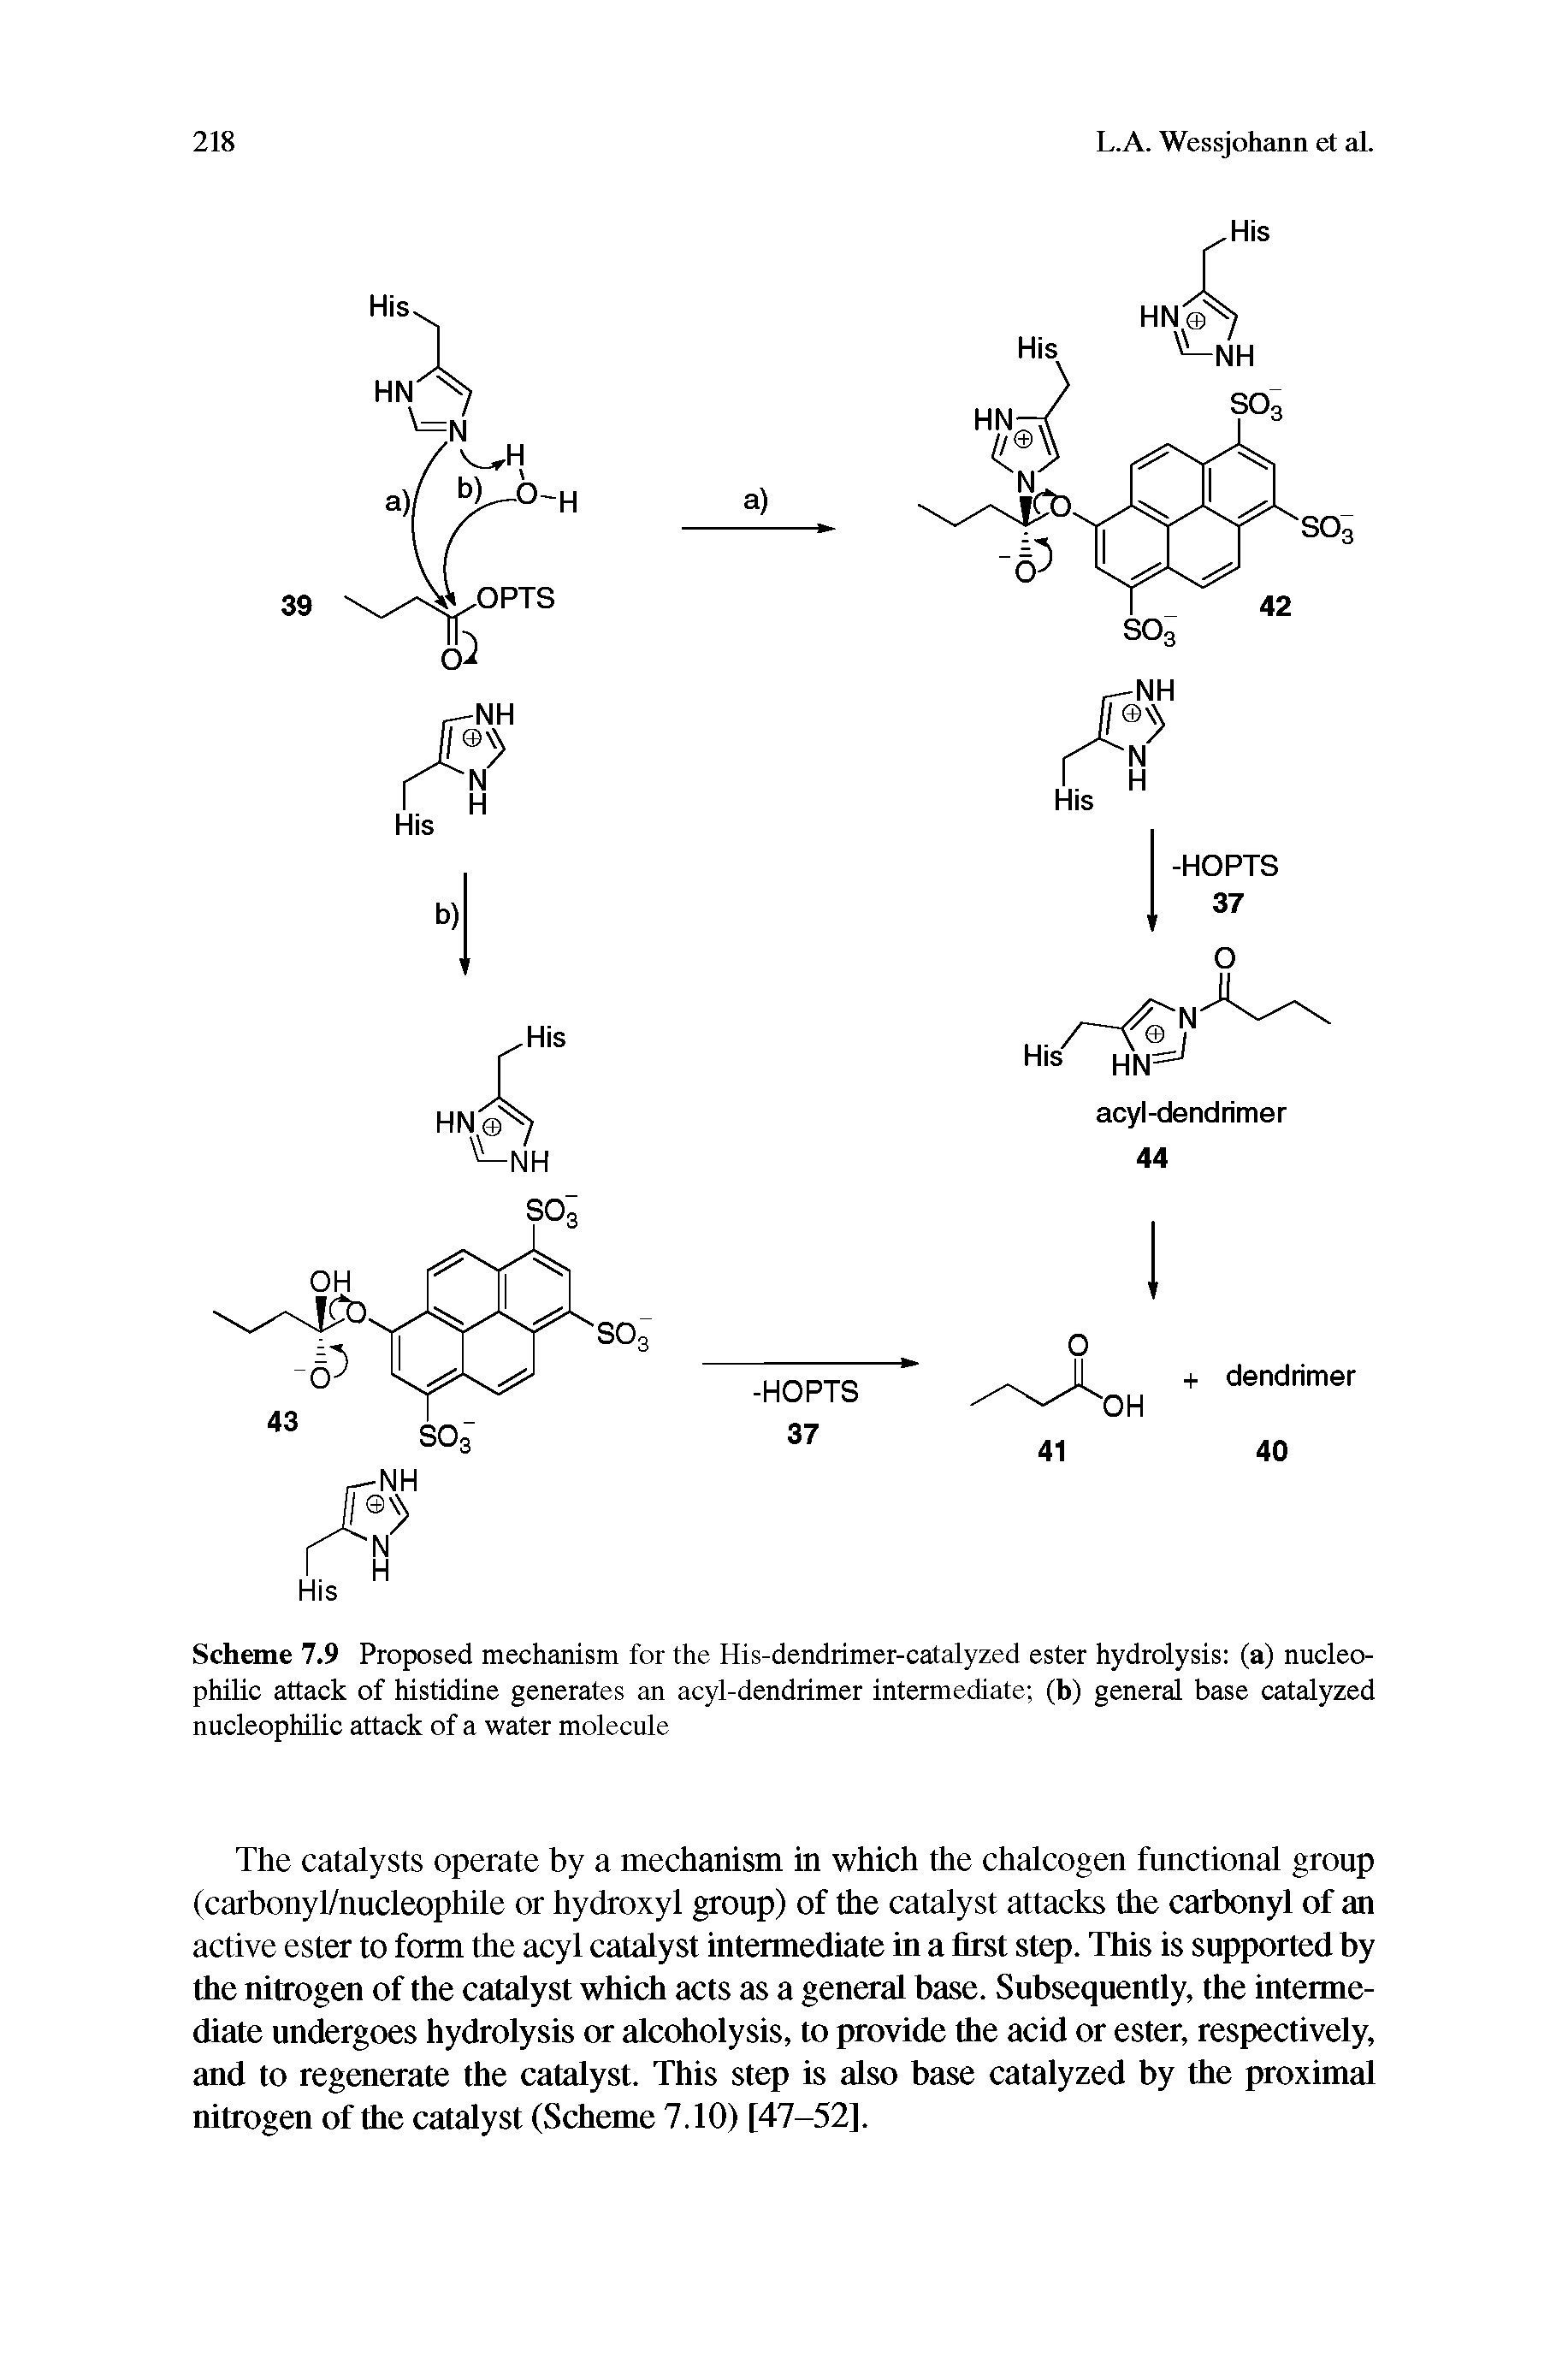 Scheme 7.9 Proposed mechanism for the His-dendrimer-catalyzed ester hydrolysis (a) nucleophilic attack of histidine generates an acyl-dendrimer intermediate (b) general base catalyzed nucleophilic attack of a water molecule...